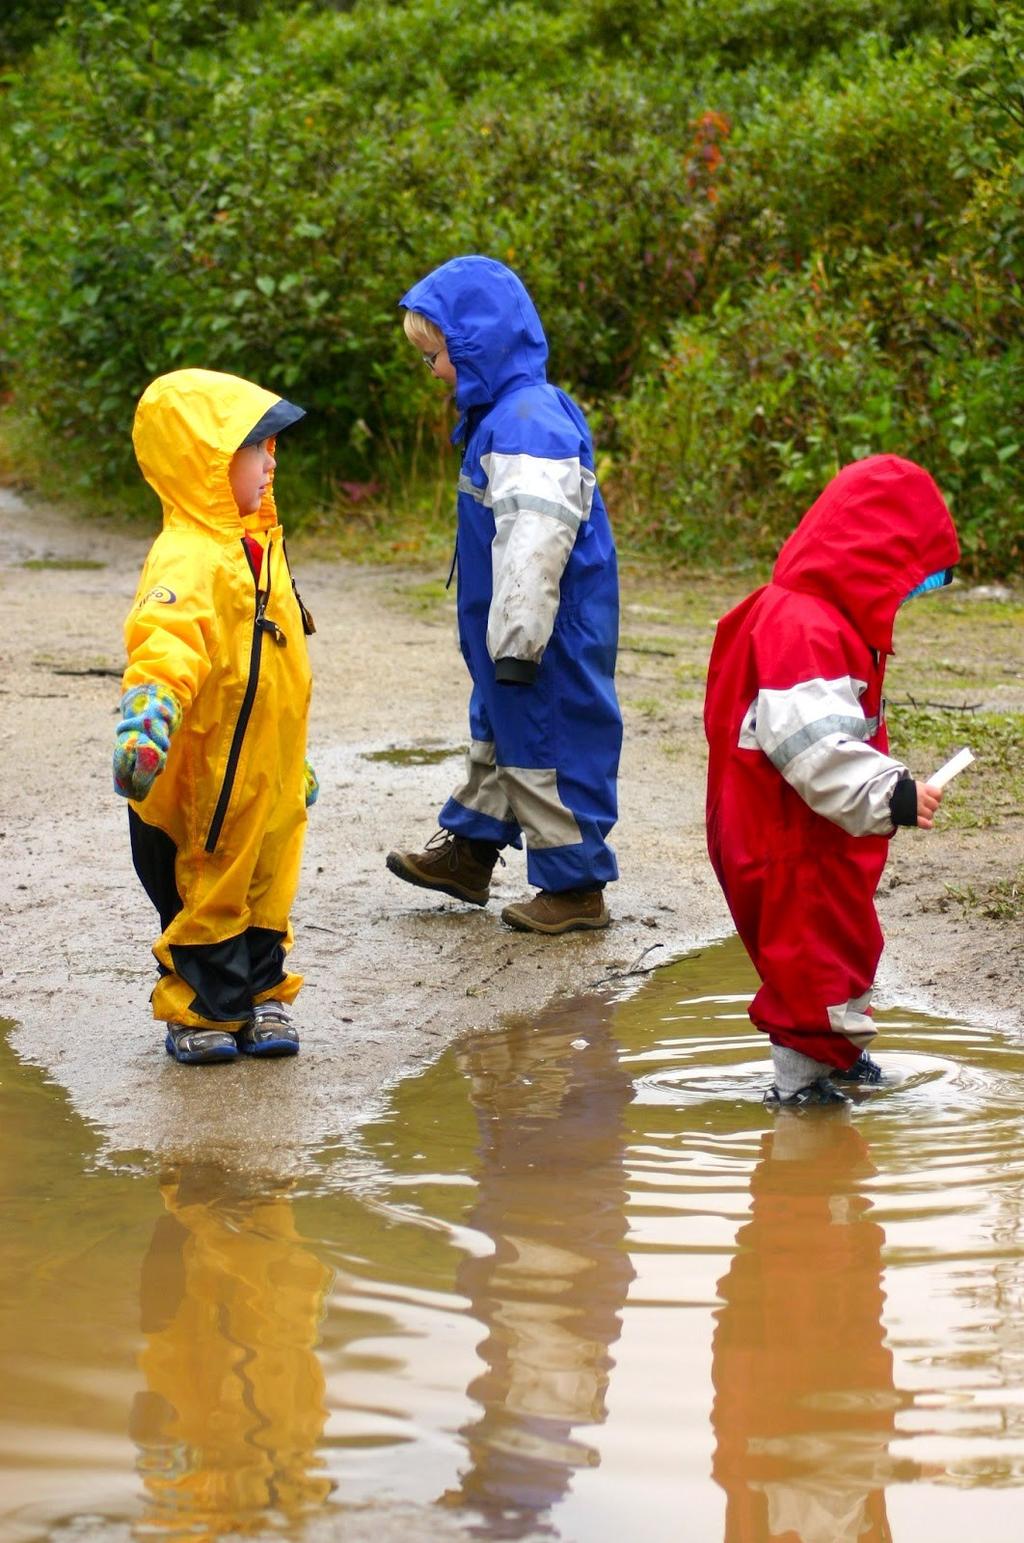 The weather can be unpredictable. Please ensure that your students DRESS FOR THE WEATHER!